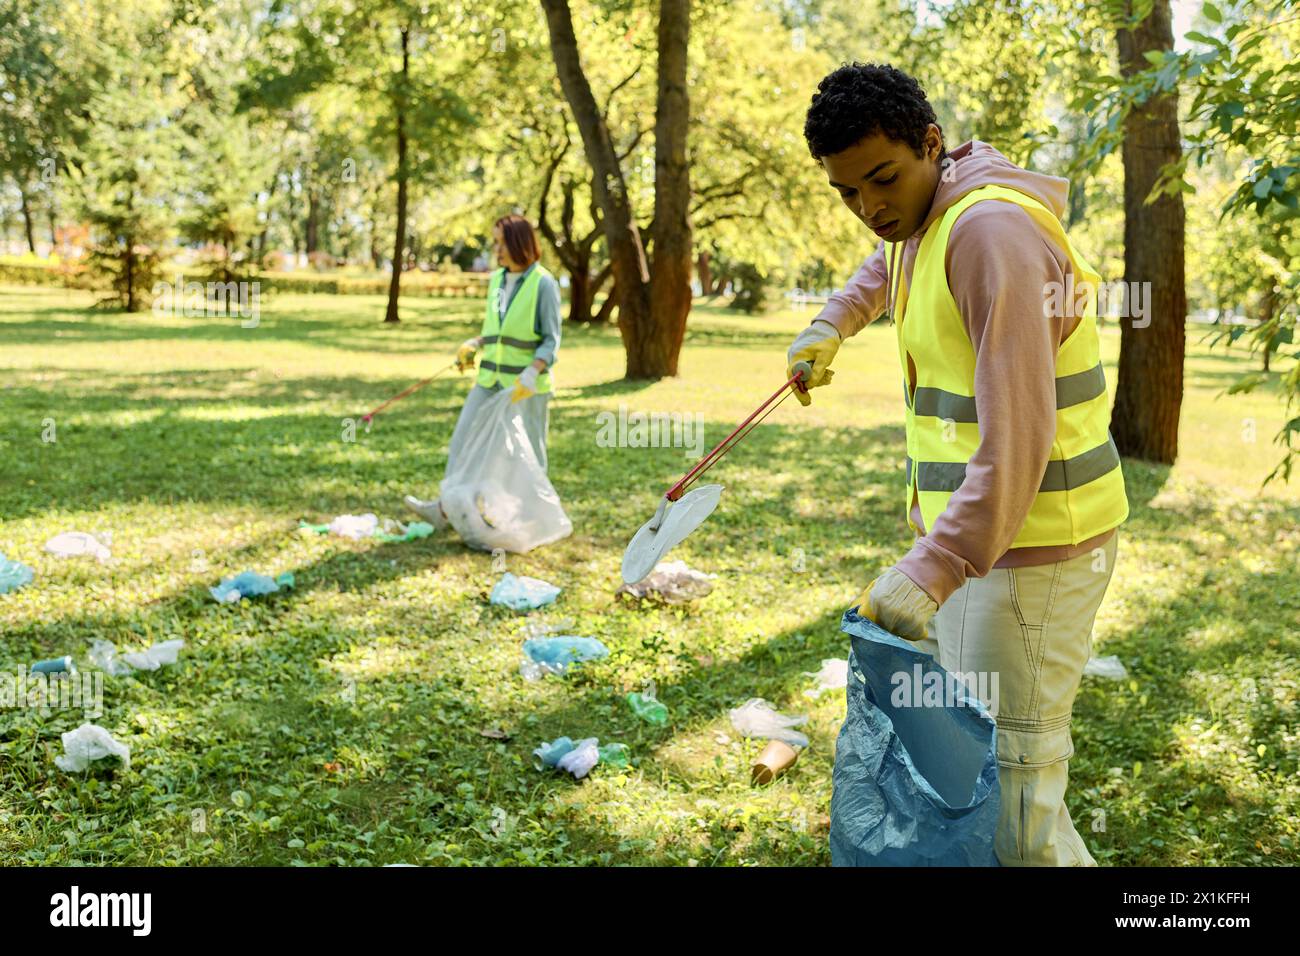 Diverse couple in a vibrant yellow vest tidies the grass in a park with care, embodying the spirit of environmental stewardship. Stock Photo